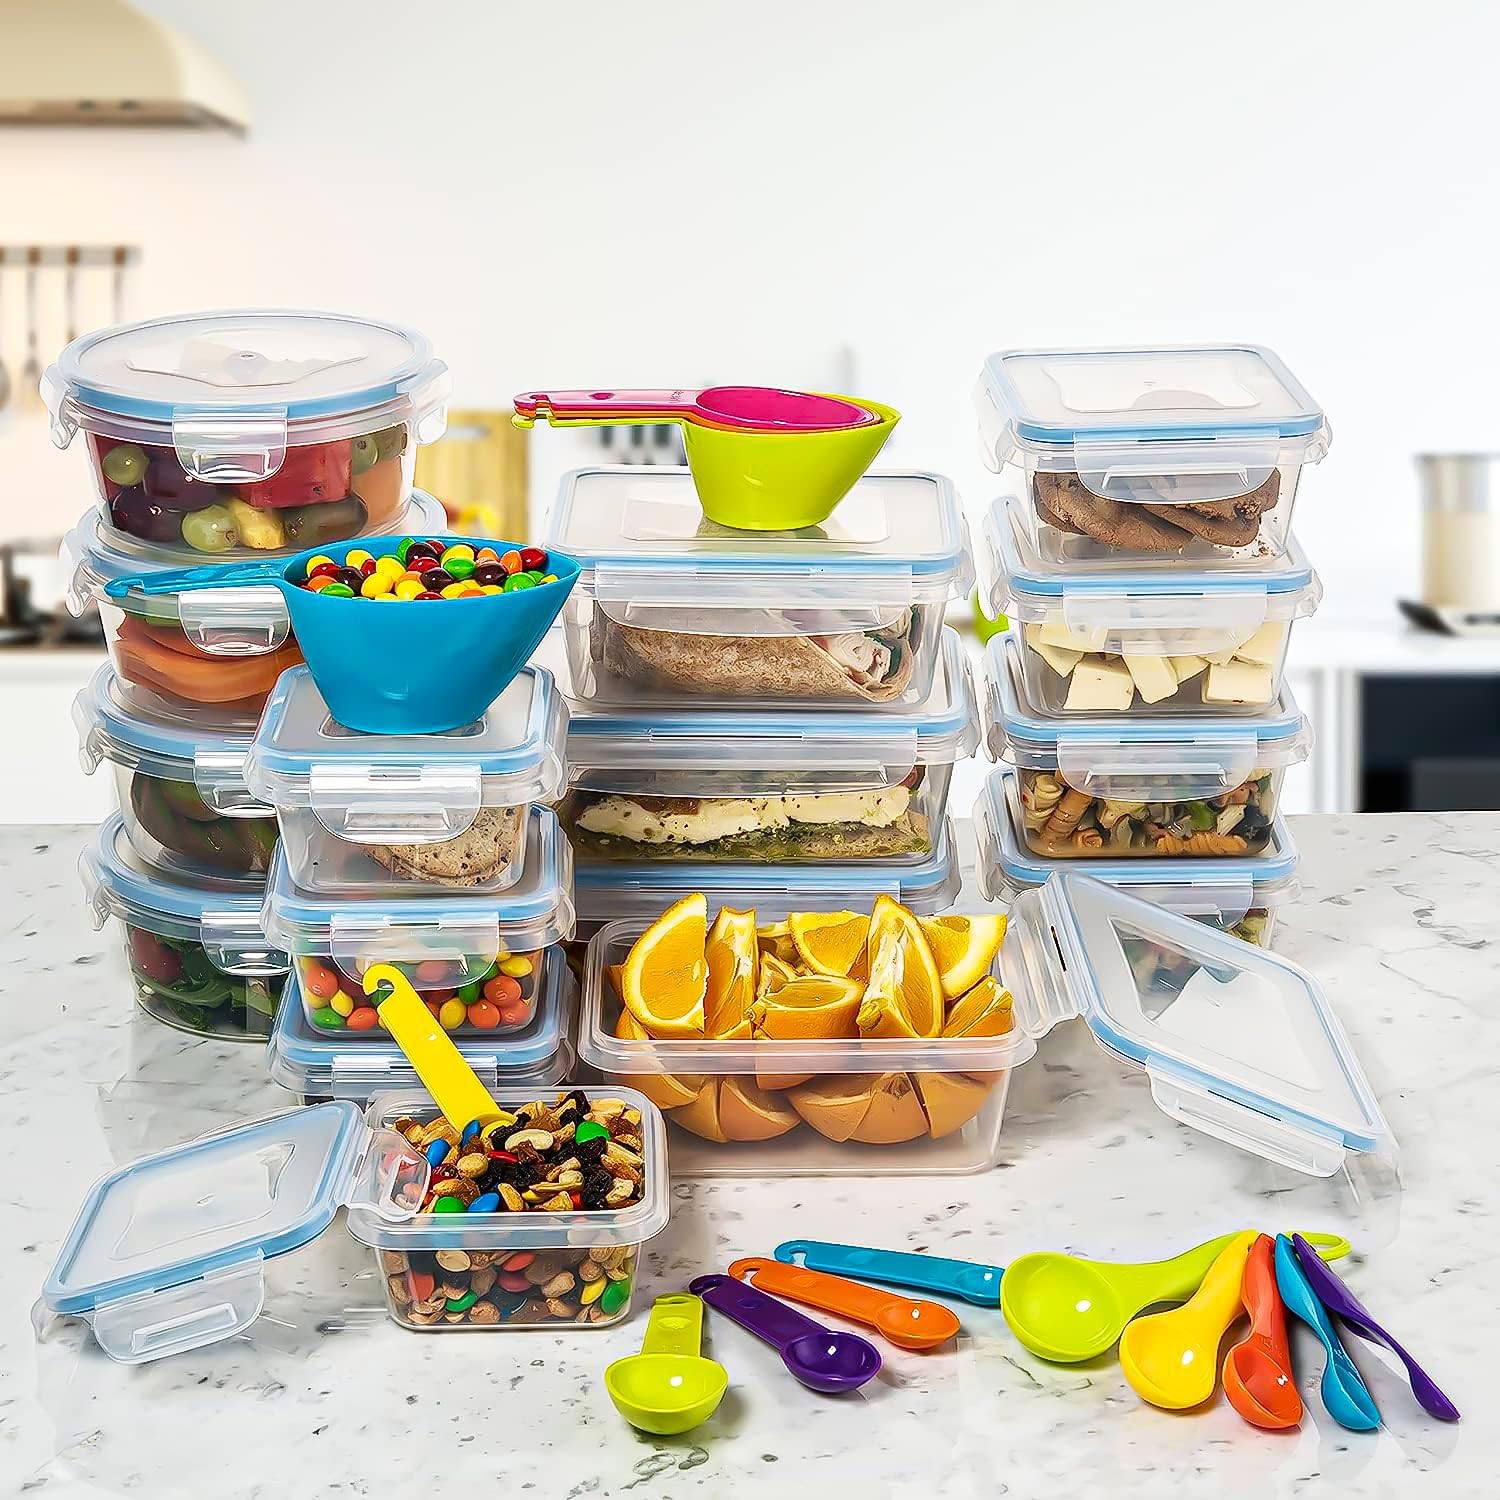 14 Best Food Storage Containers Bpa Free For 2023 1688528000 